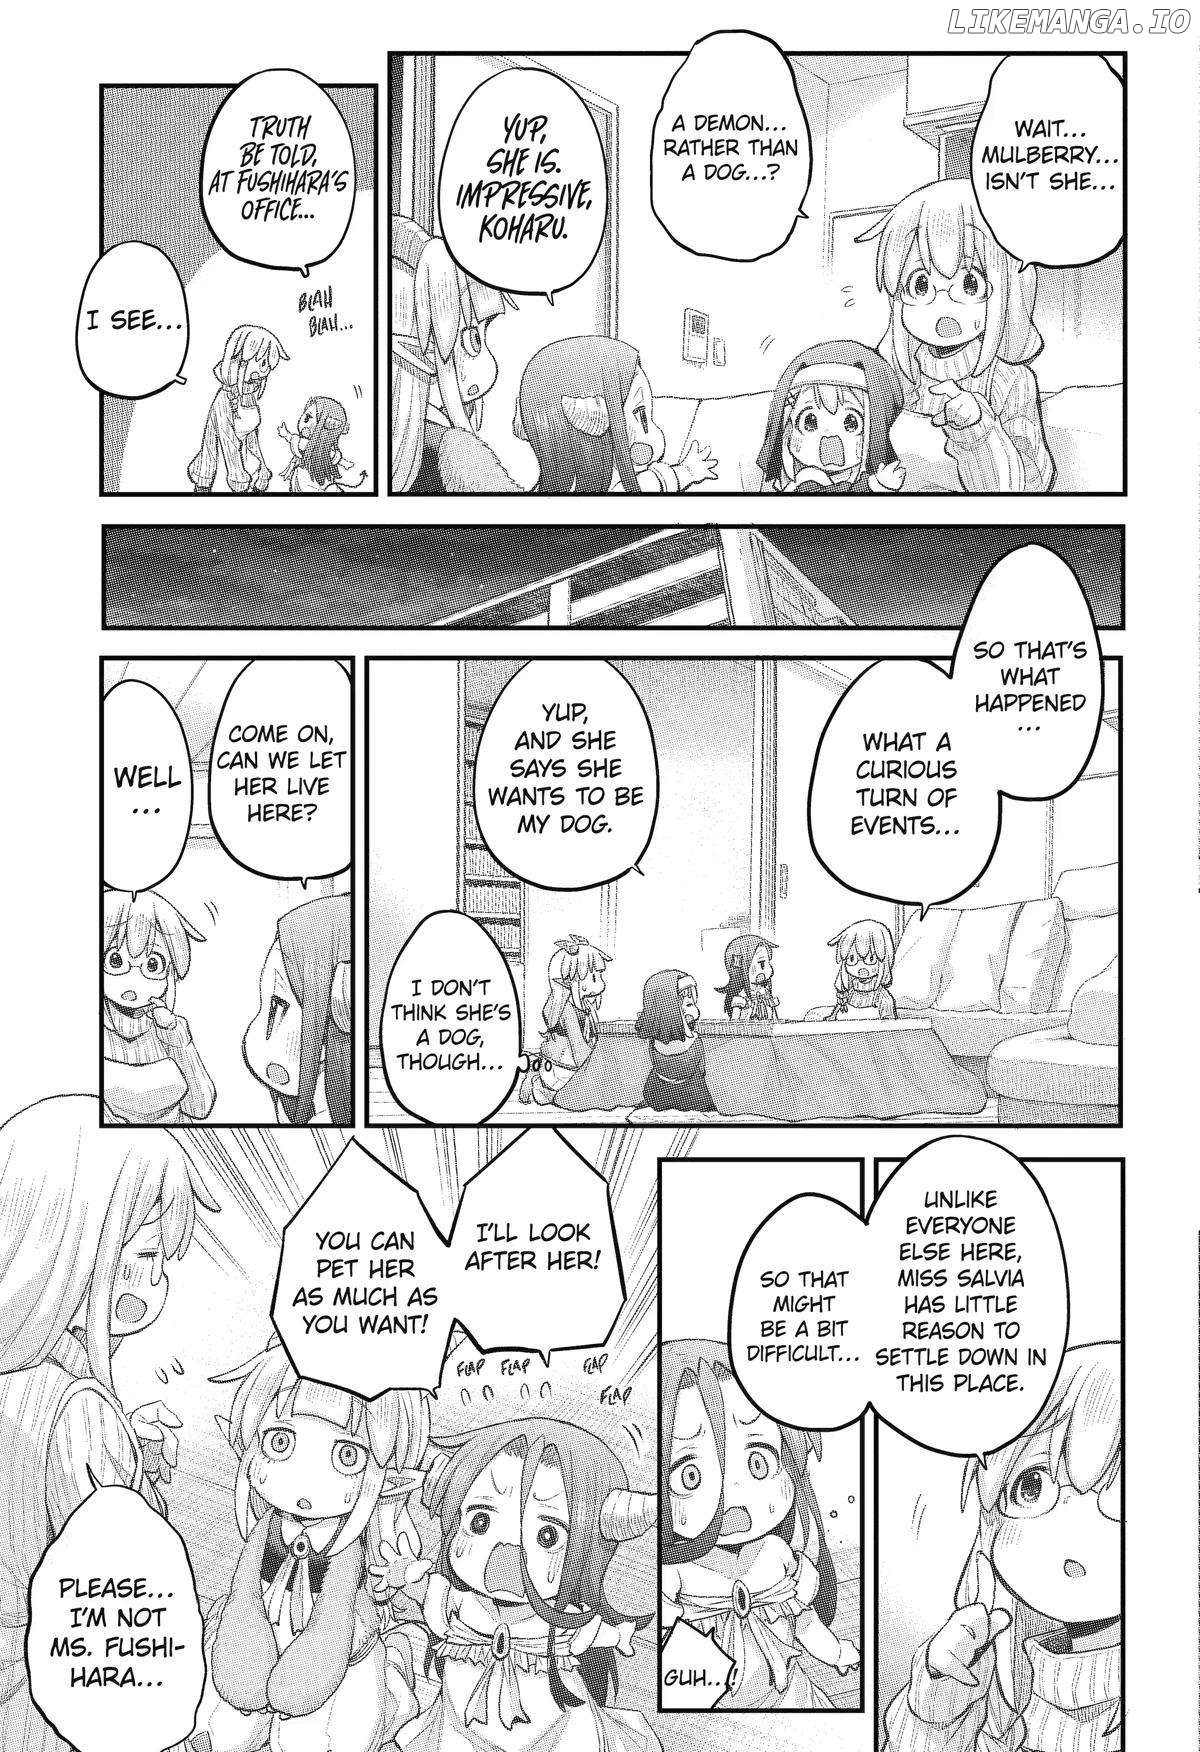 Ms. Corporate Slave Wants to be Healed by a Loli Spirit - chapter 105 - #3